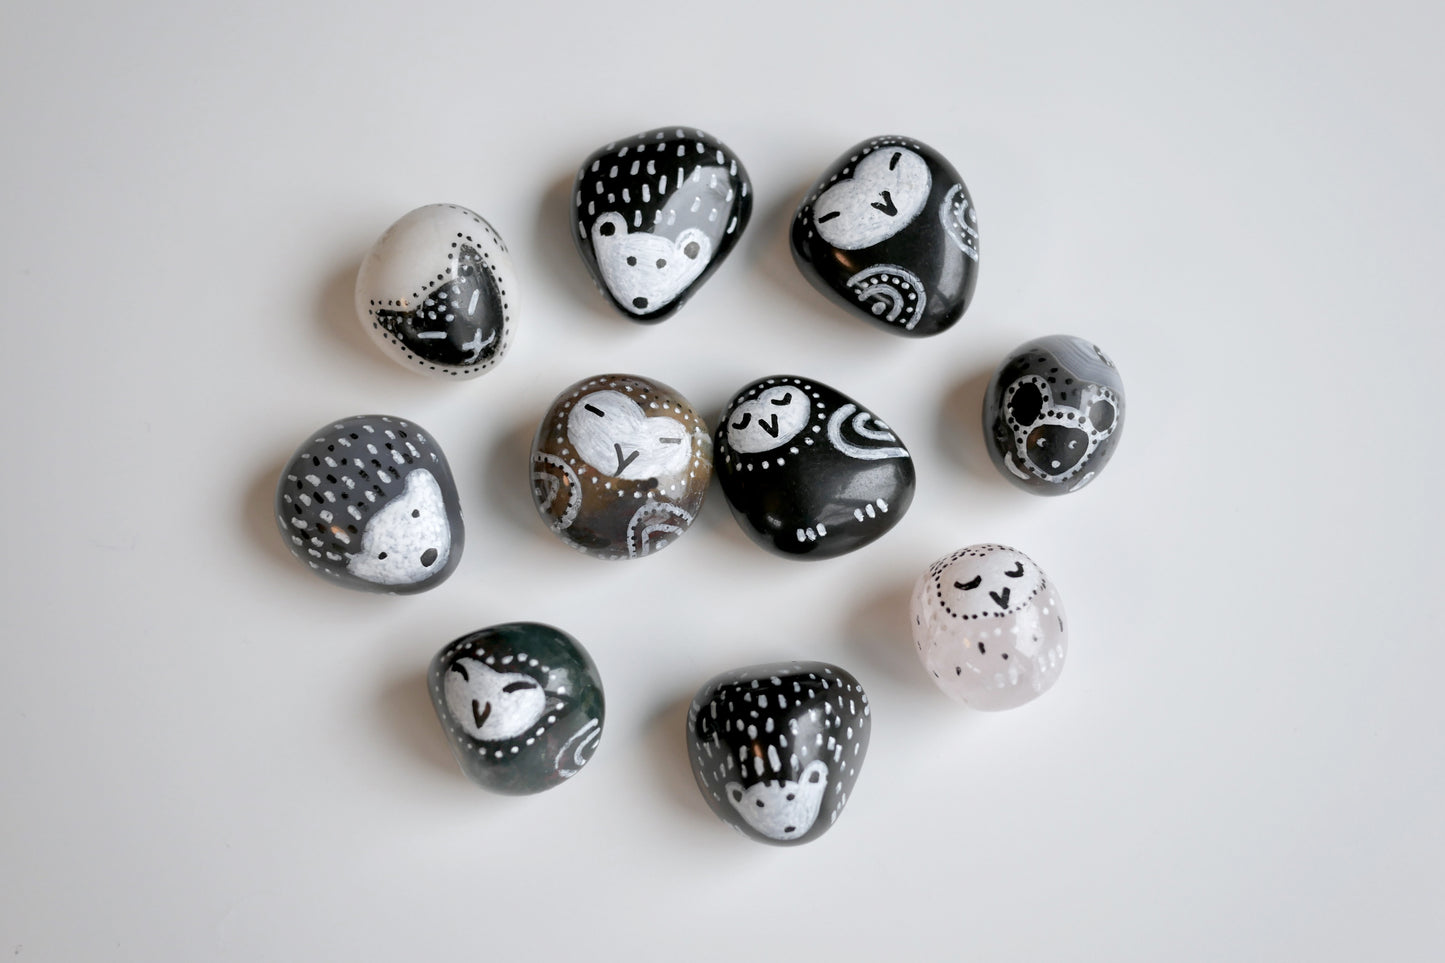 "Black and White", a unique set of 10 crystals